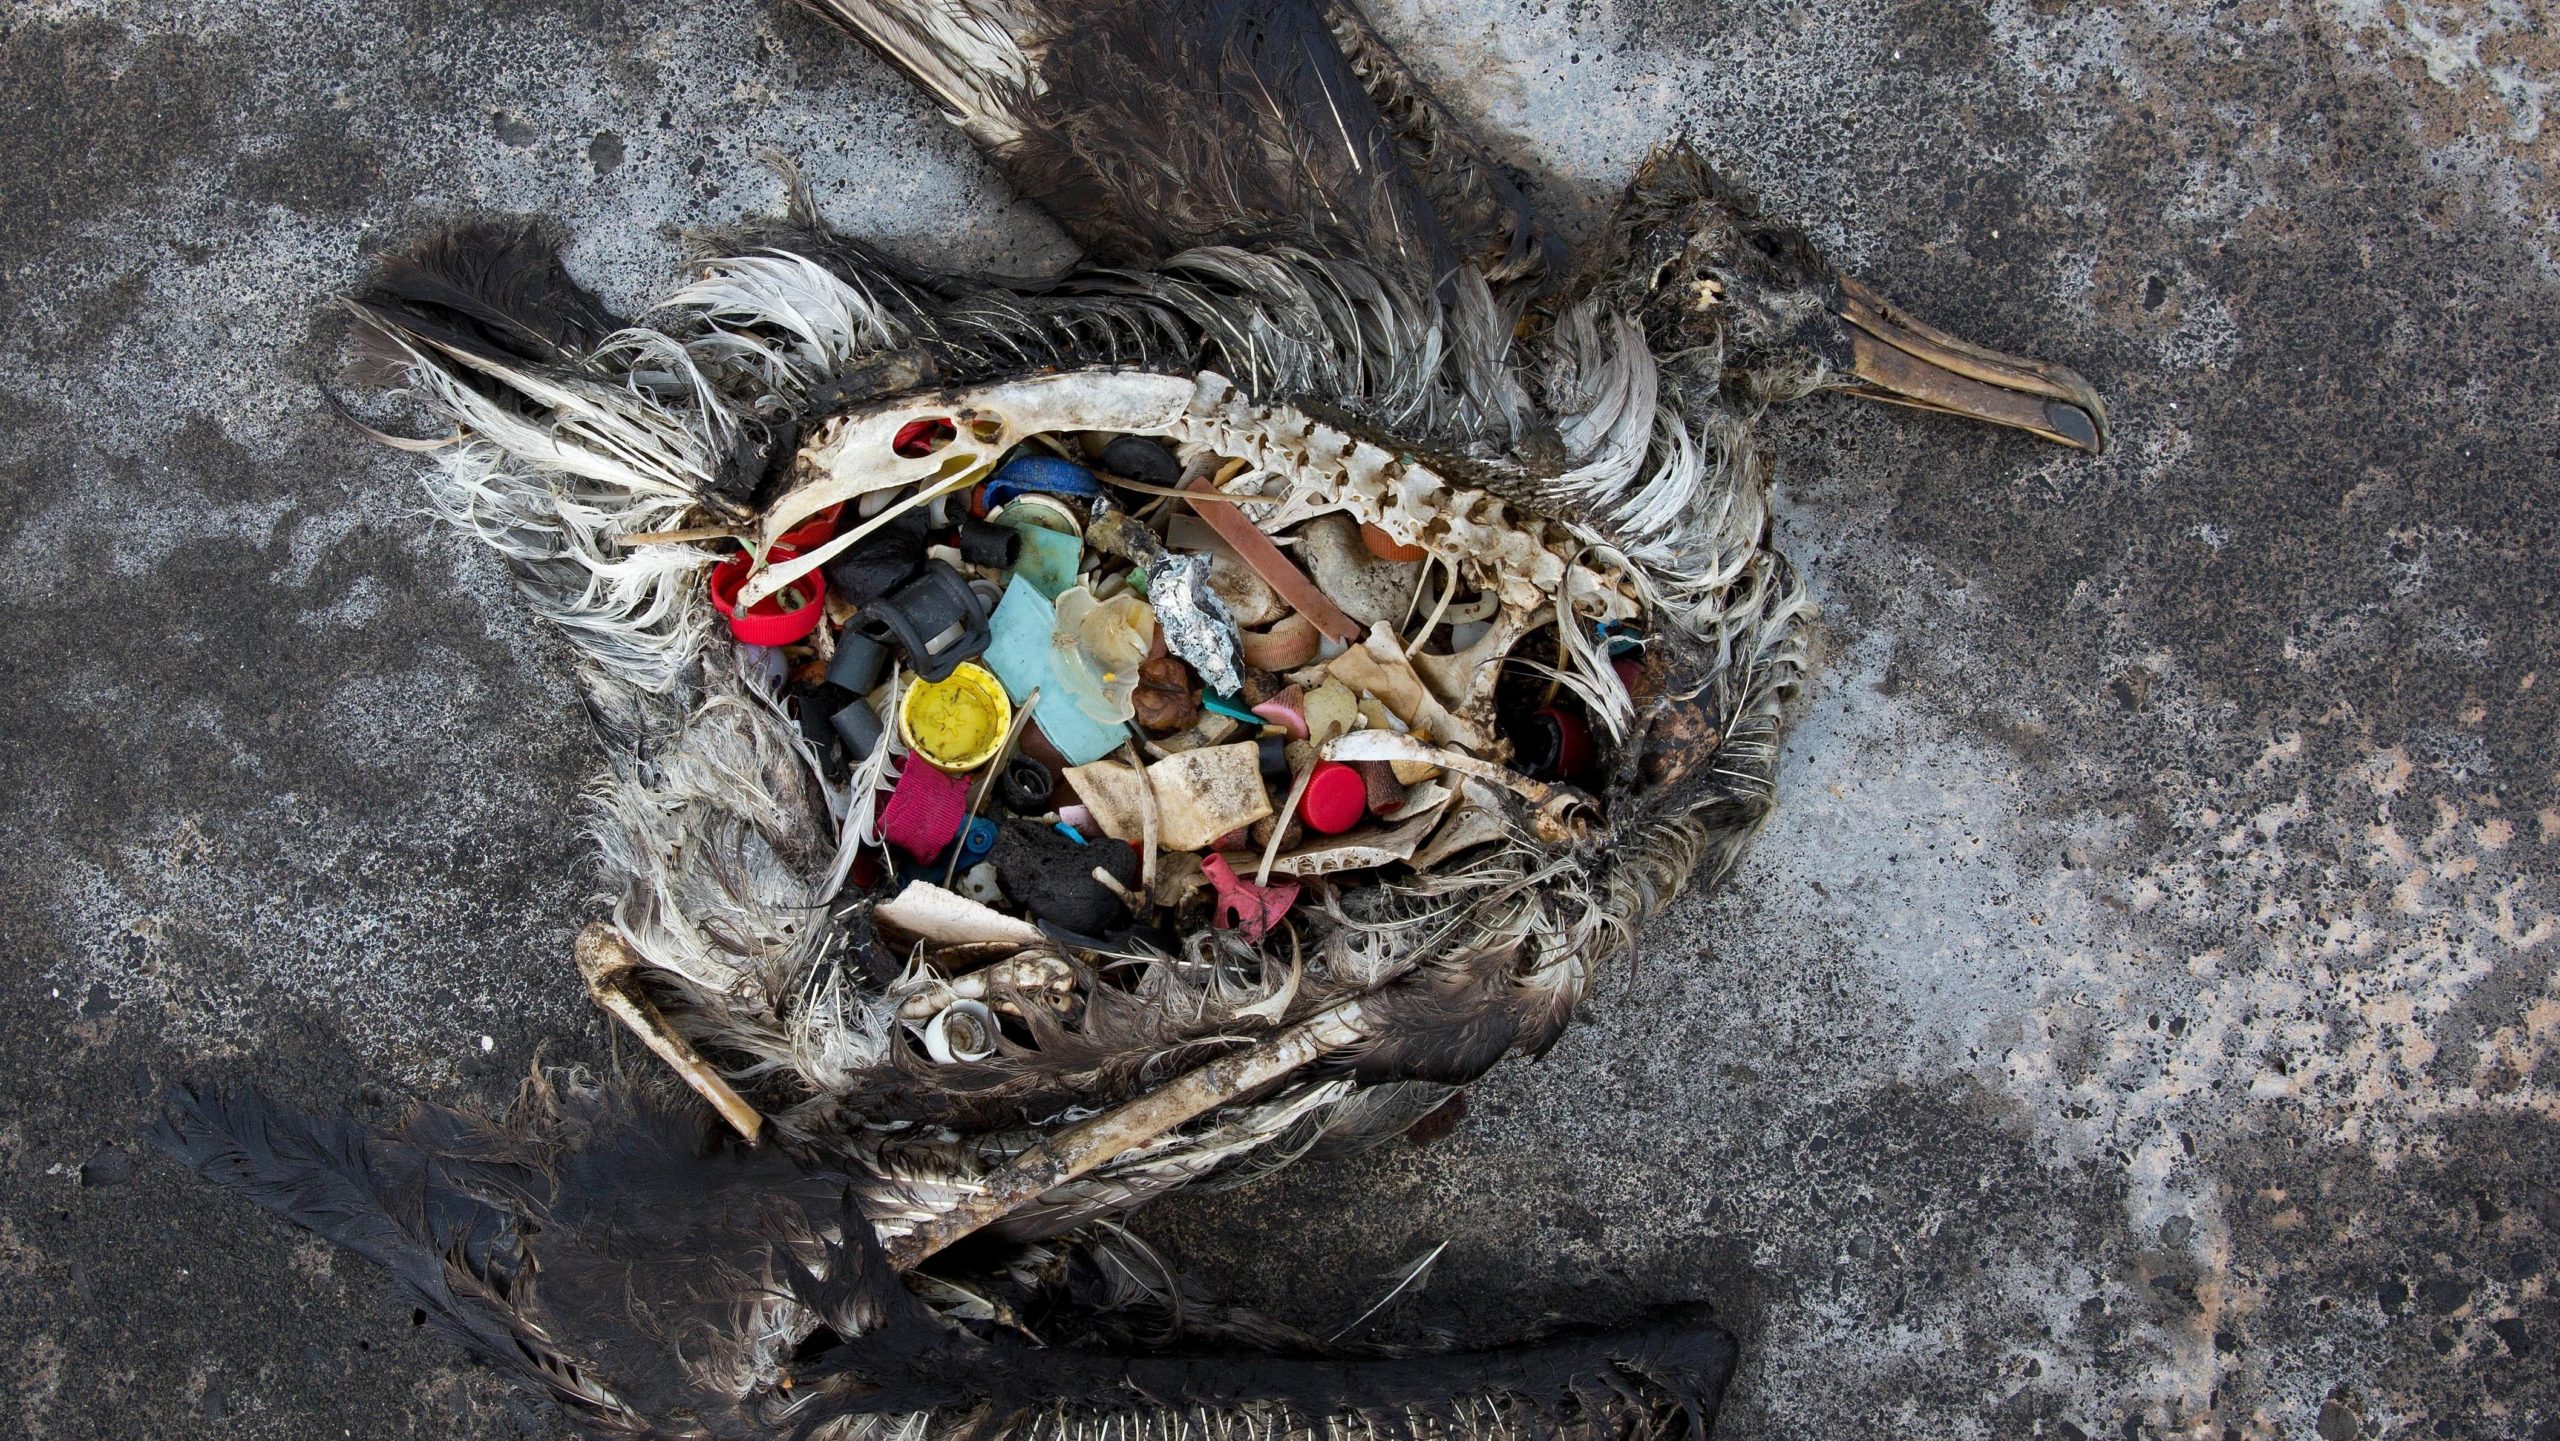 A black footed albatross chick with plastics in its stomach lies dead on Midway Atoll in the Northwestern Hawaiian Islands. The remote atoll sits amid a collection of manmade debris called the Great Pacific Garbage Patch. (Photo: Dan Clark/USFWS, AP)